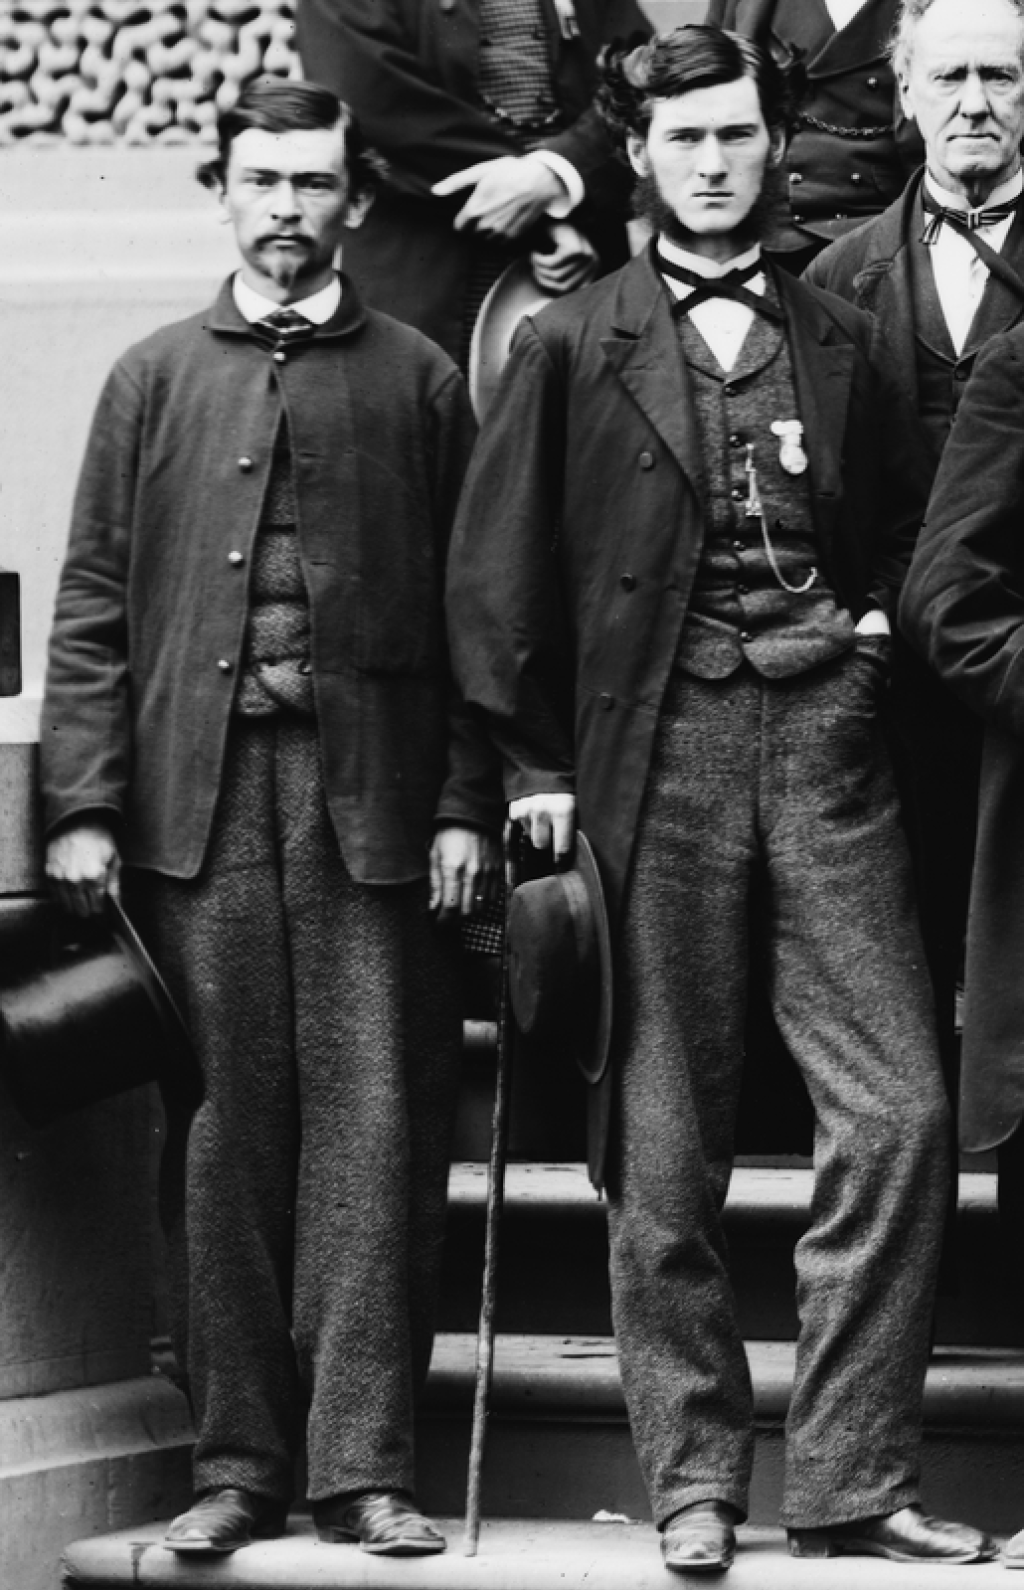 Two gentlemen with matching waistcoats and trousers.